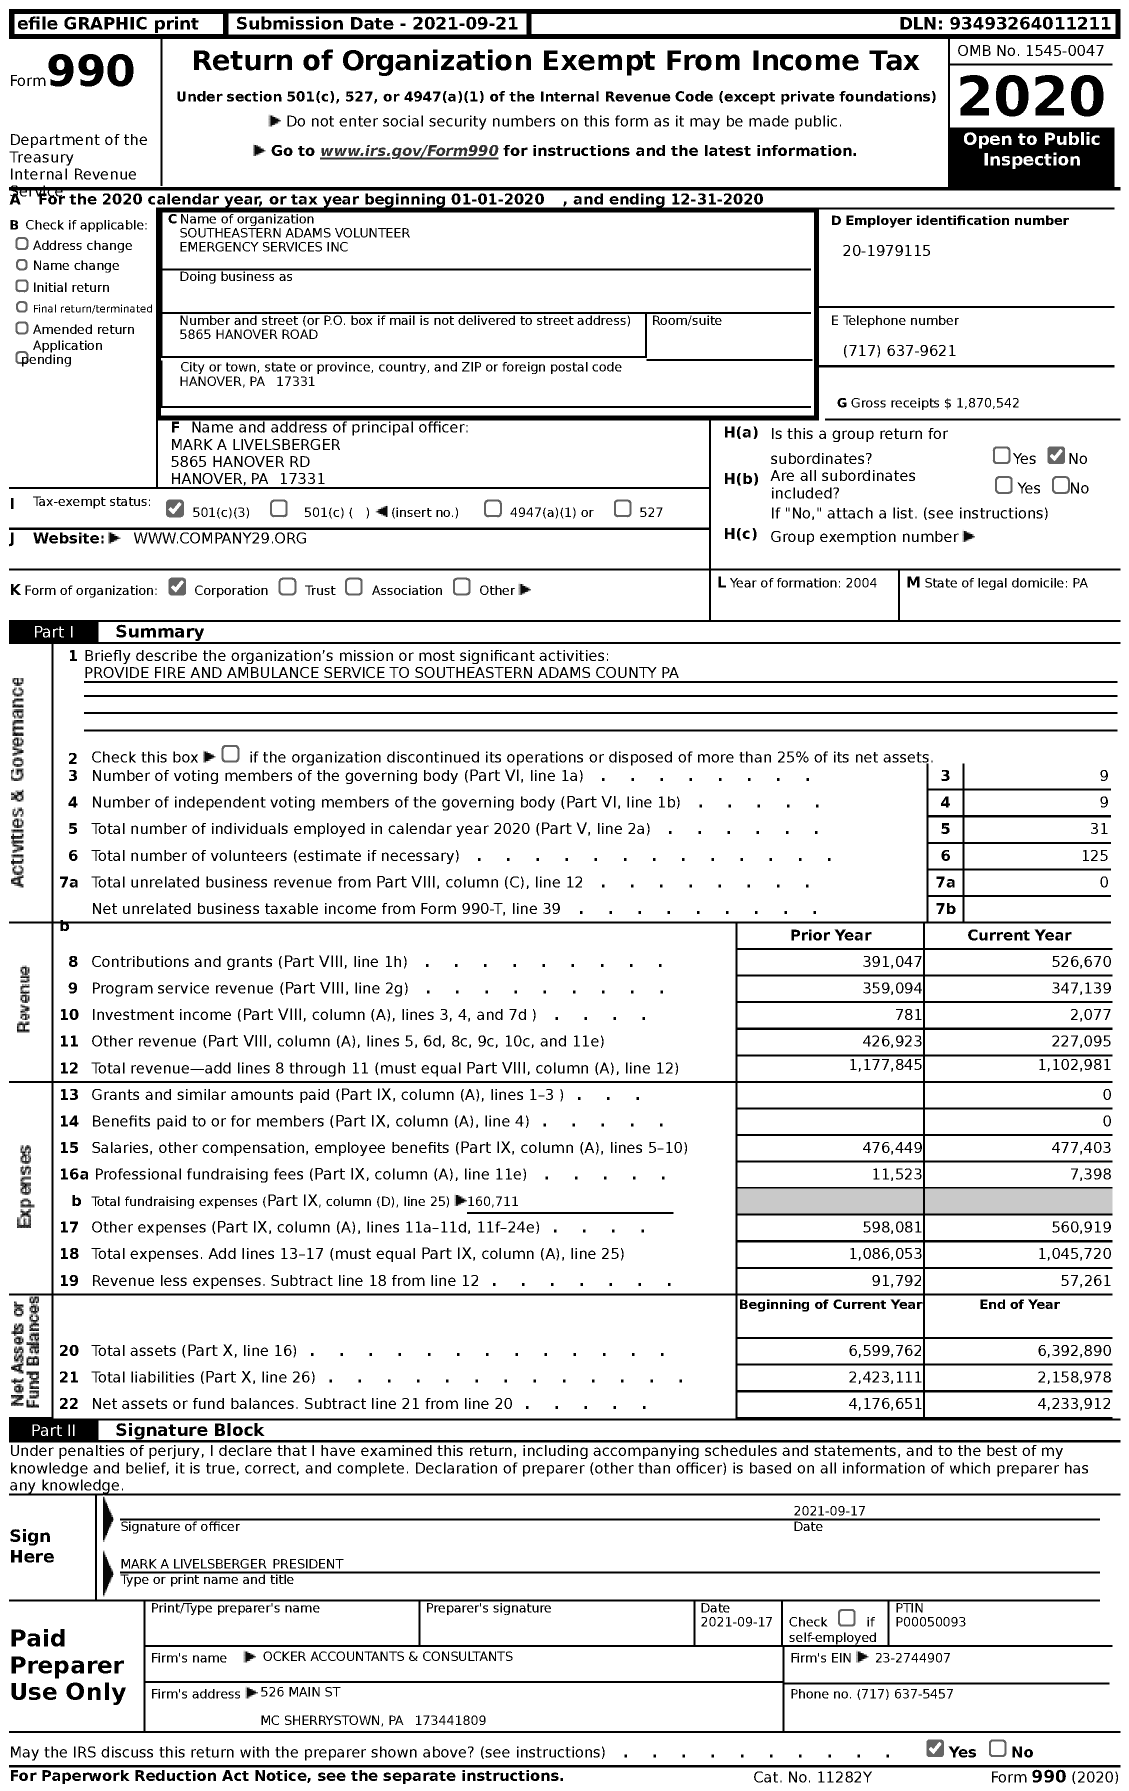 Image of first page of 2020 Form 990 for Southeastern Adams Volunteer Emergency Services (SAVES)